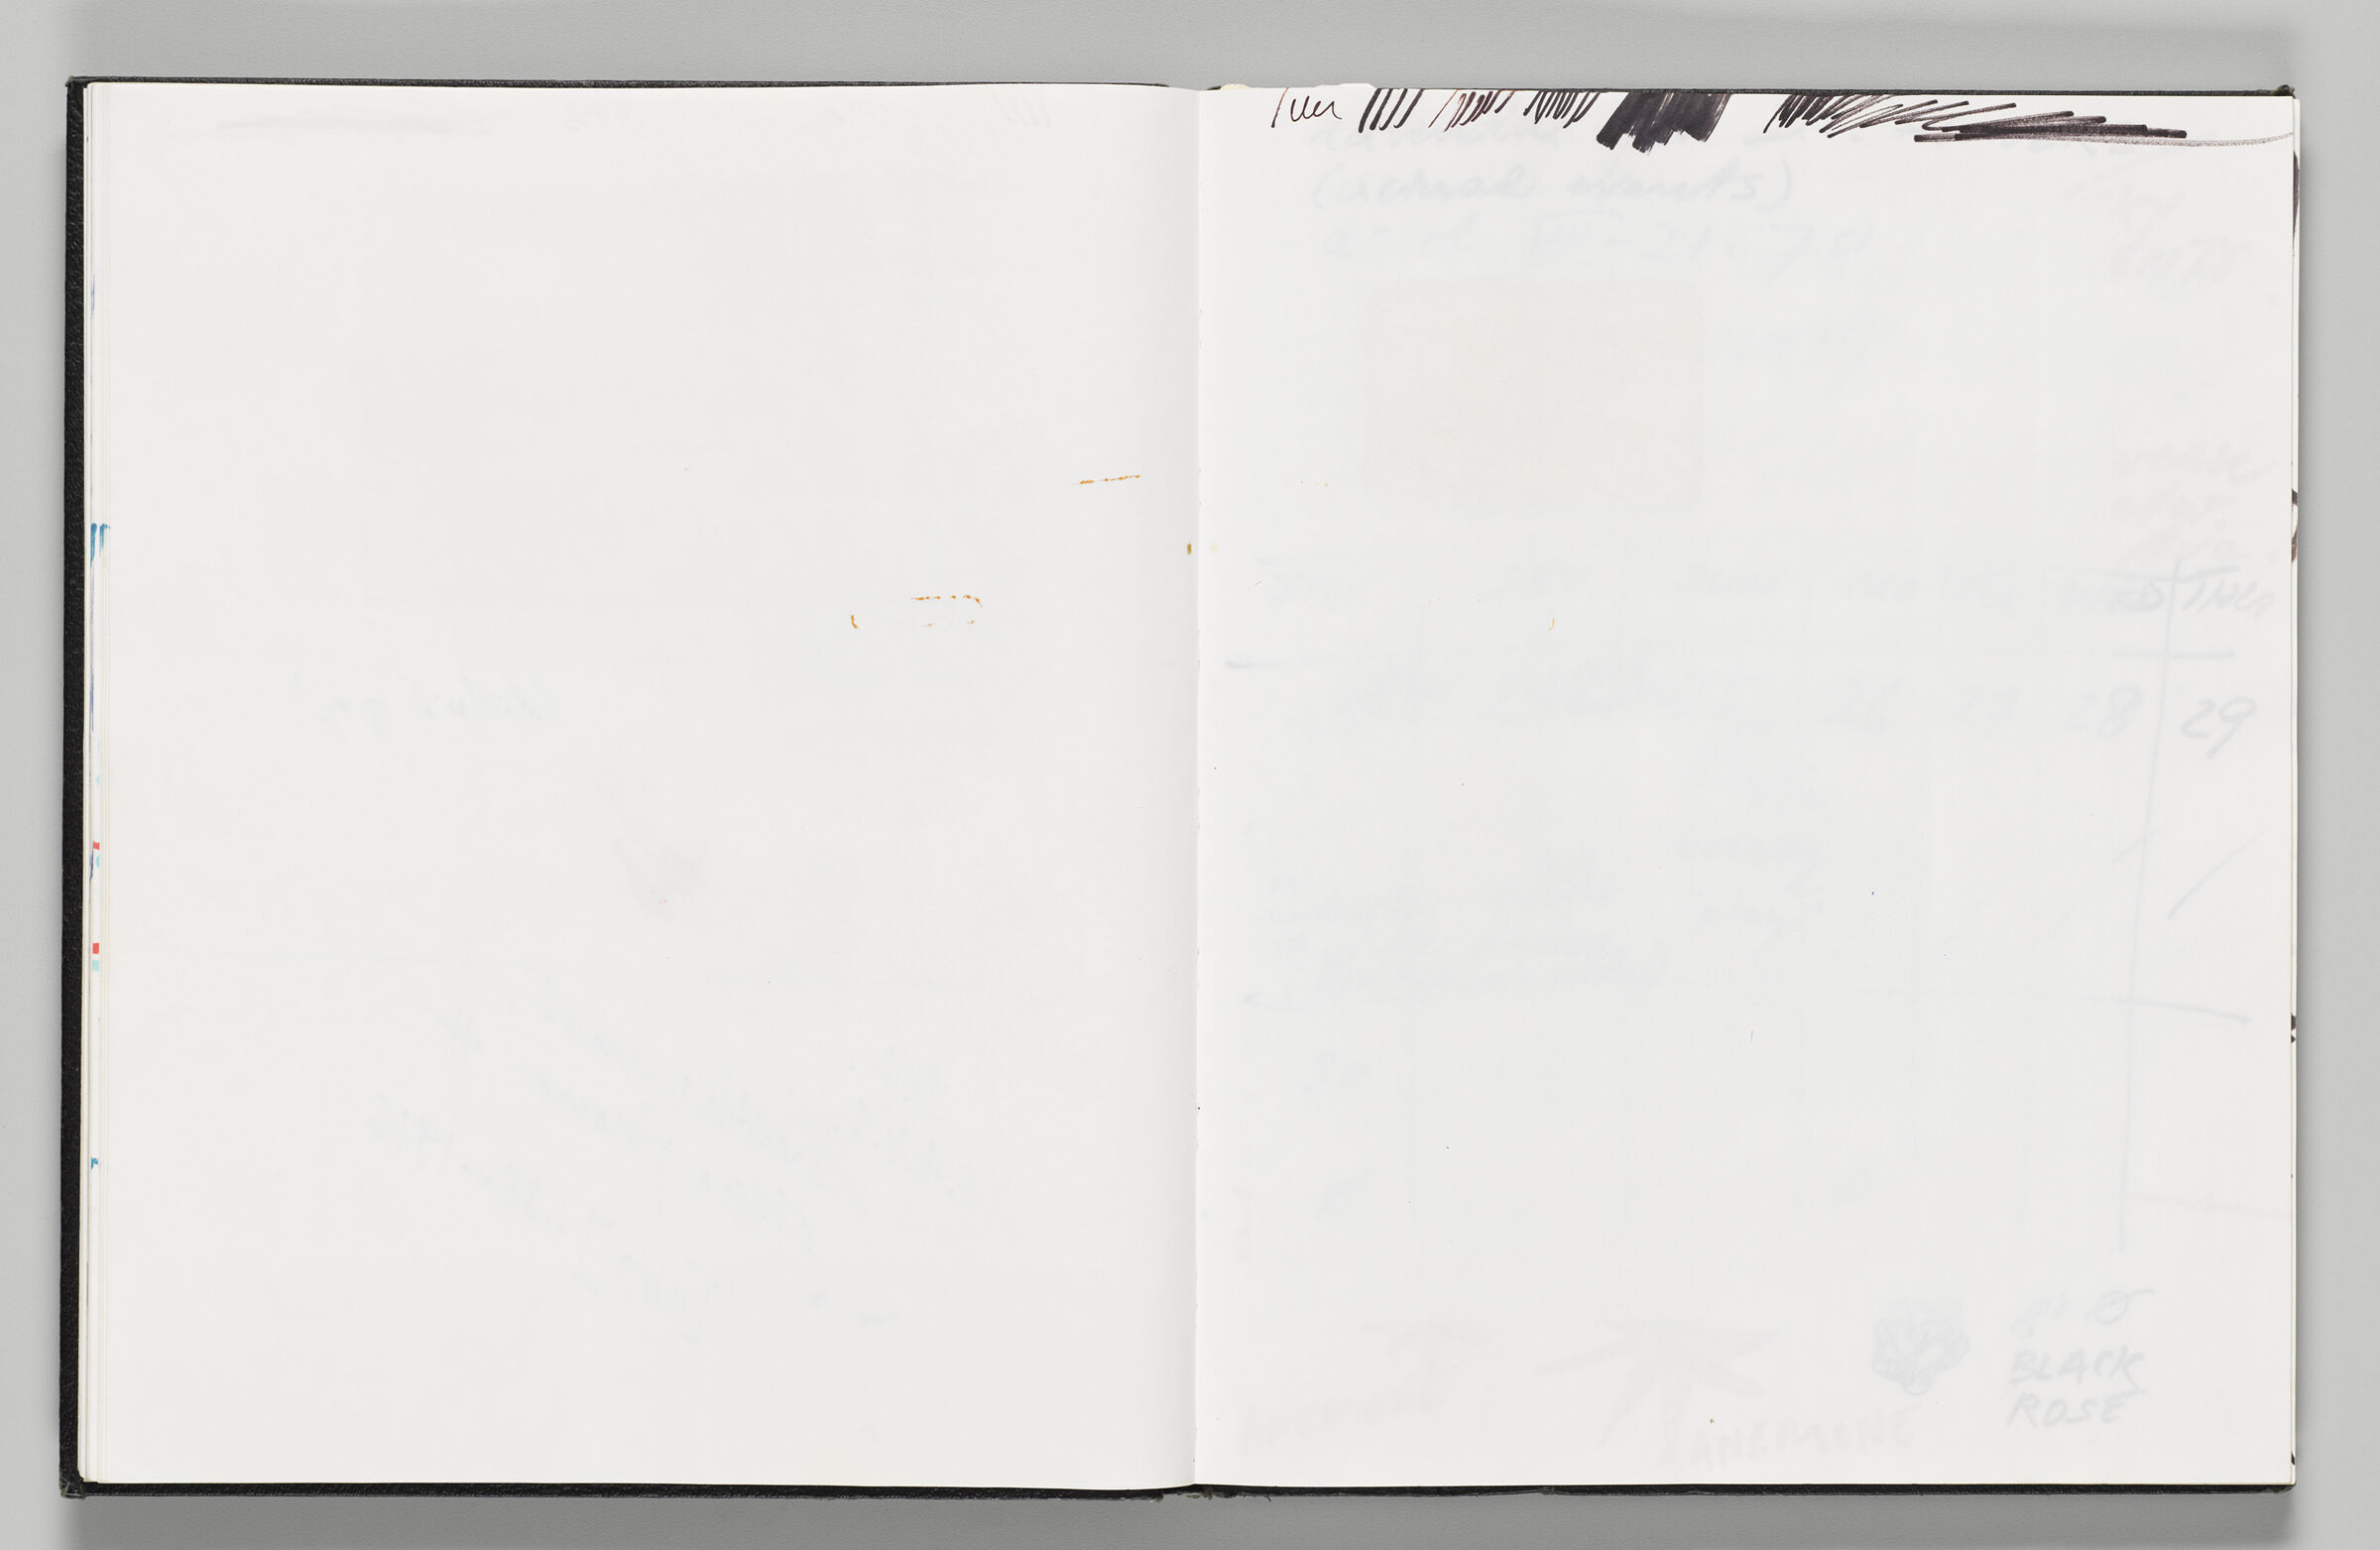 Untitled (Blank With Paperclip Stains, Left Page); Untitled (Black Marker Tests With Color Transfer, Right Page)